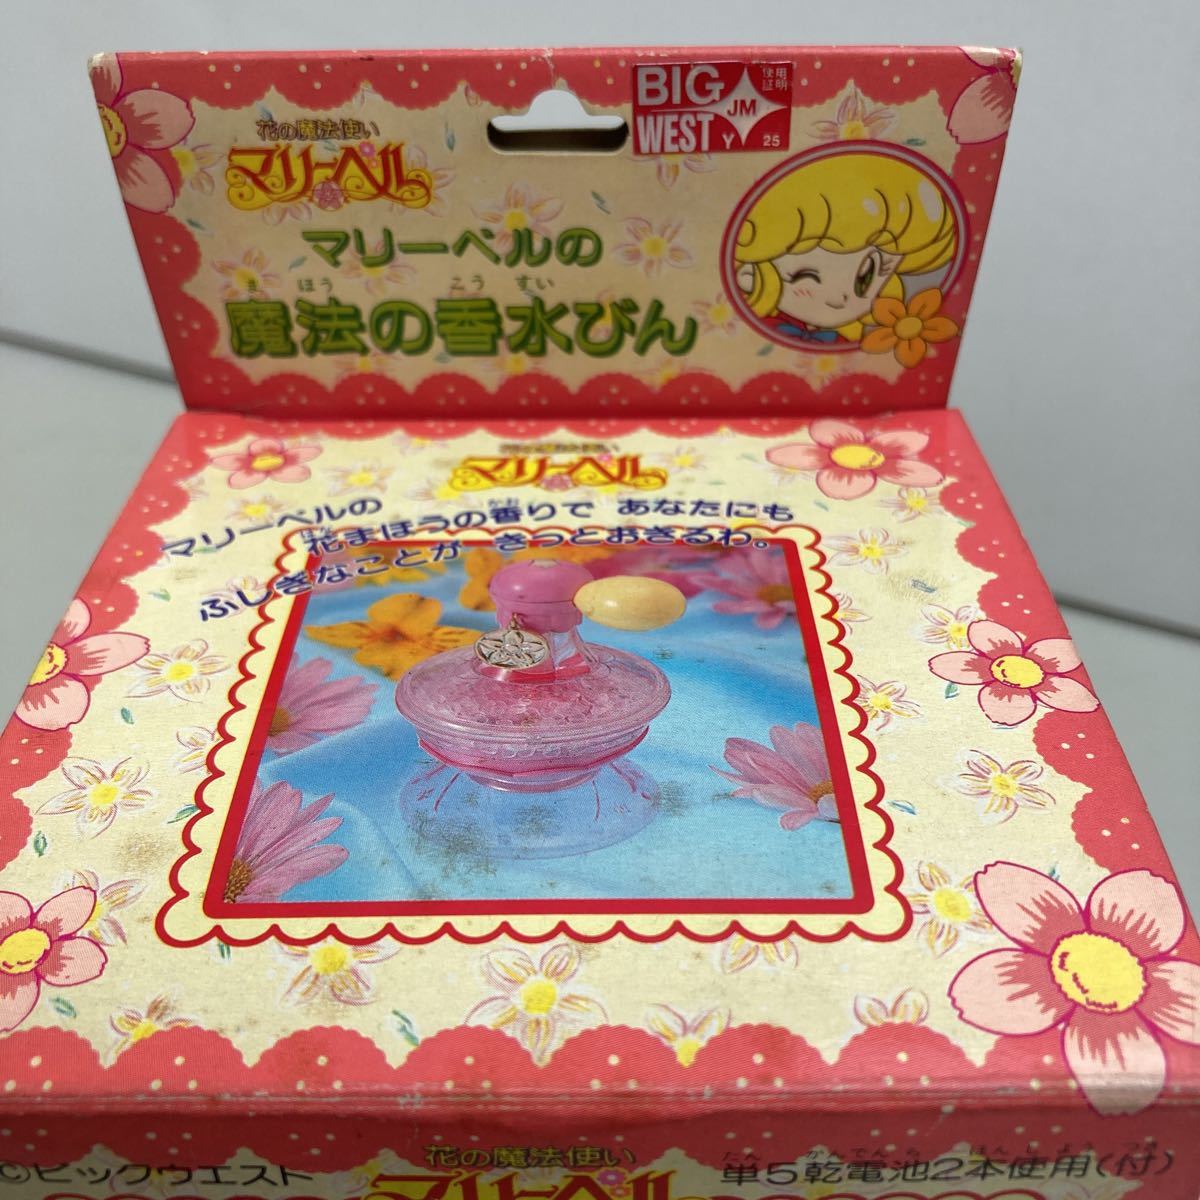 00 rare goods 0BANDAI0 flower. Mahou Tsukai Marie bell 0 Marie bell. magic. perfume bin 0MADE.IN.JP01992 year 0 unused goods 0 beautiful goods 0 that time thing 0 out of print 0 rare 